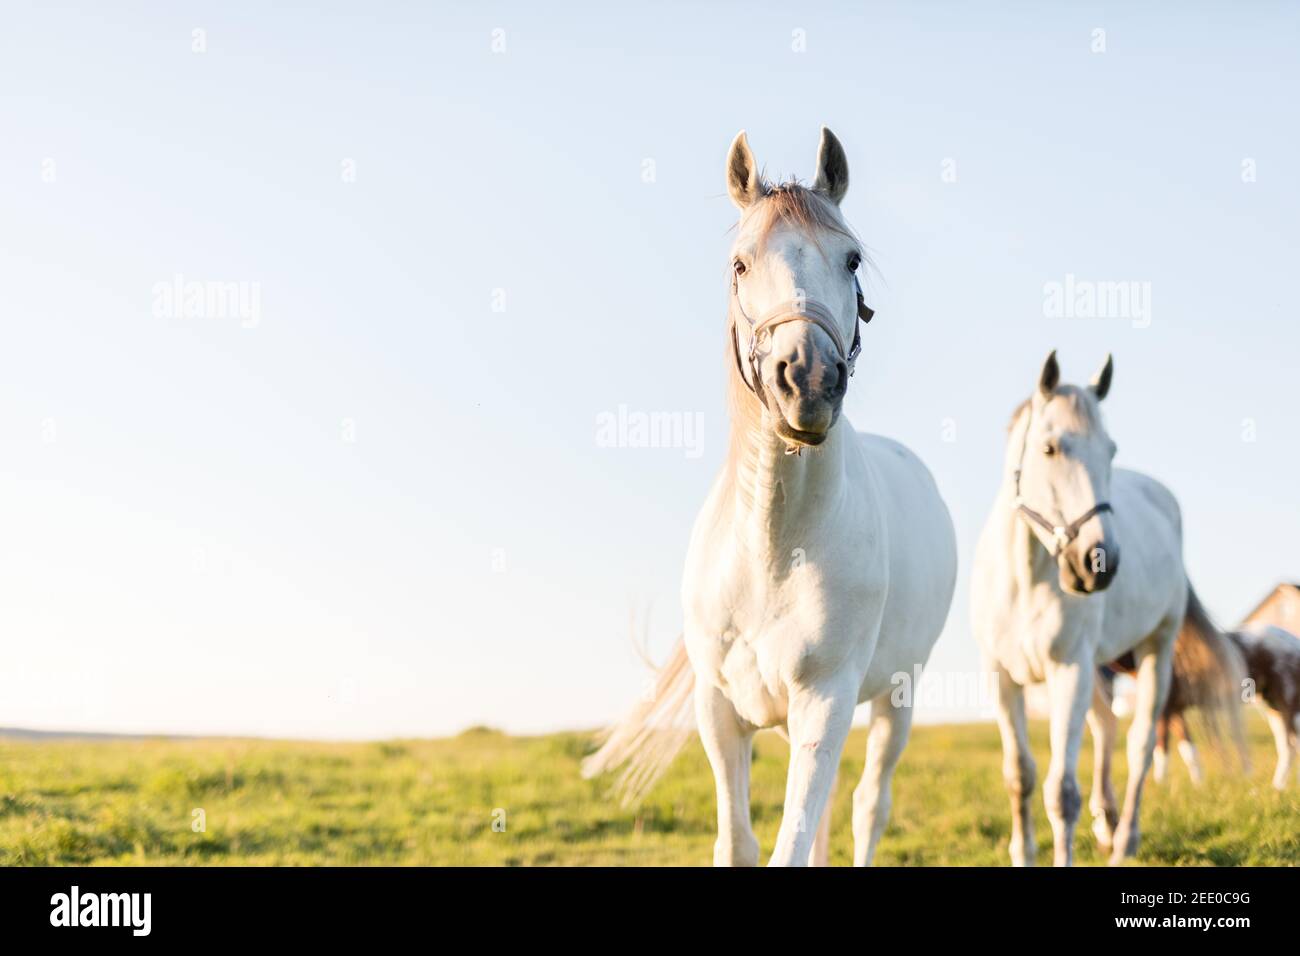 Two white horses trotting ahead on the green grass field. Animals and nature. Sunset. Stock Photo